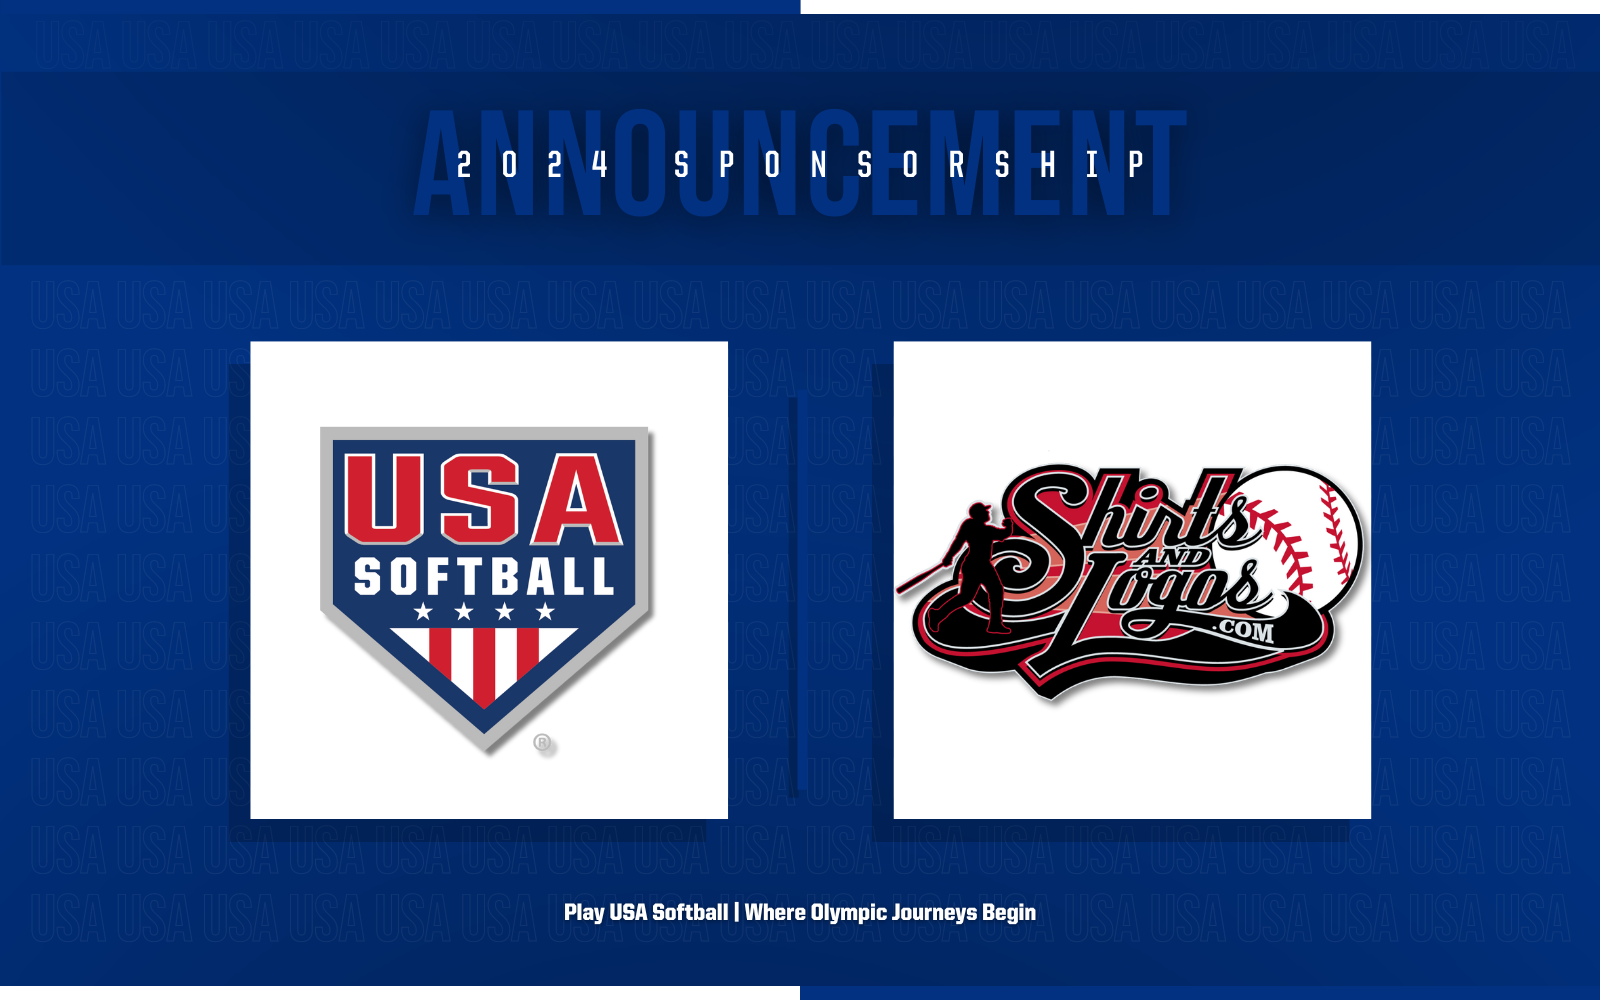 ShirtsandLogos Becomes Official Uniform Provider for the USA Softball Slow Pitch National Teams featured image